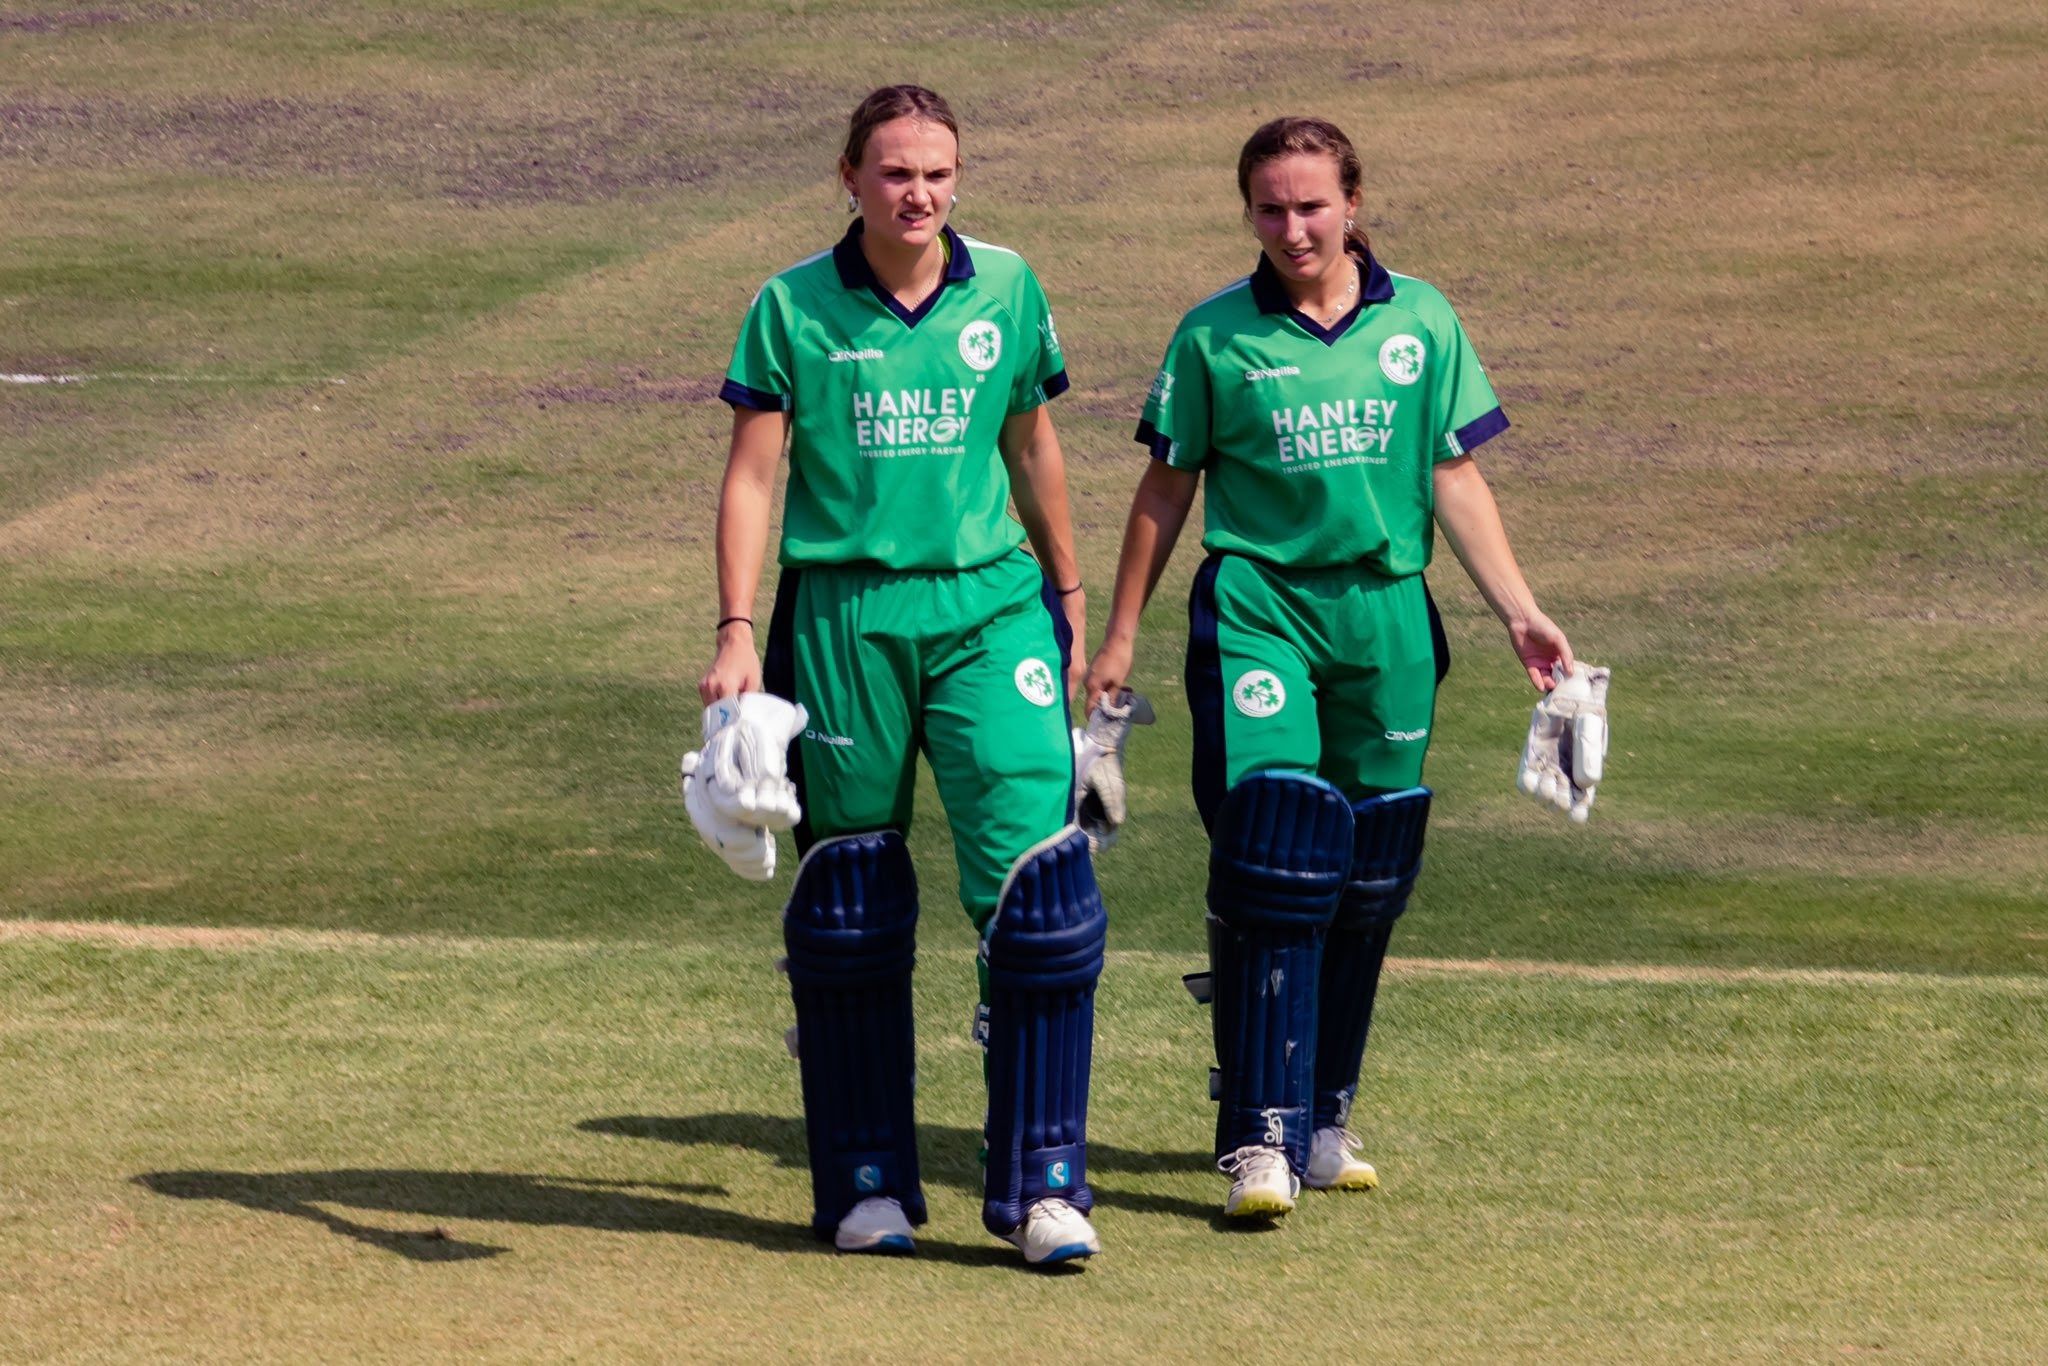 Zimbabwe and Ireland women to meet for the last ODI of series